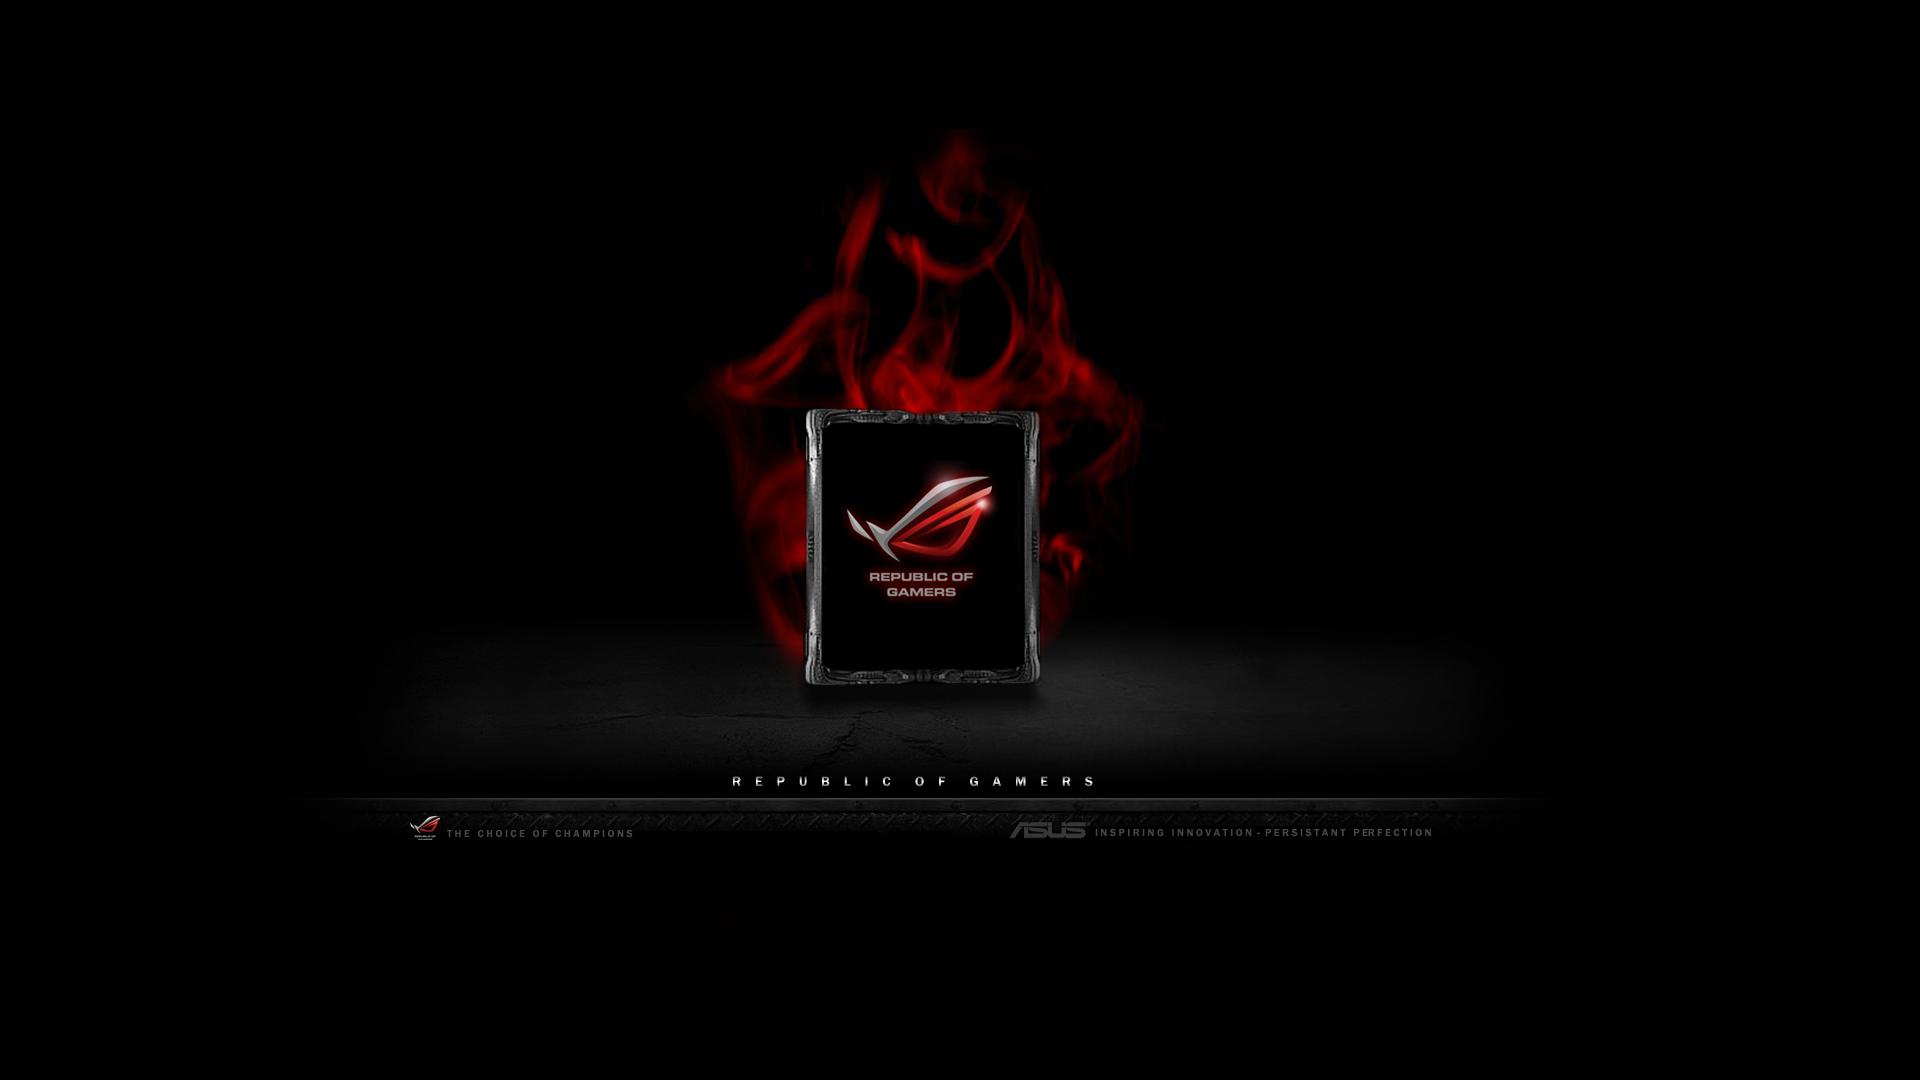 Asus Tuf Gaming Wallpapers Wallpaper Cave Download, share or upload your own one! asus tuf gaming wallpapers wallpaper cave